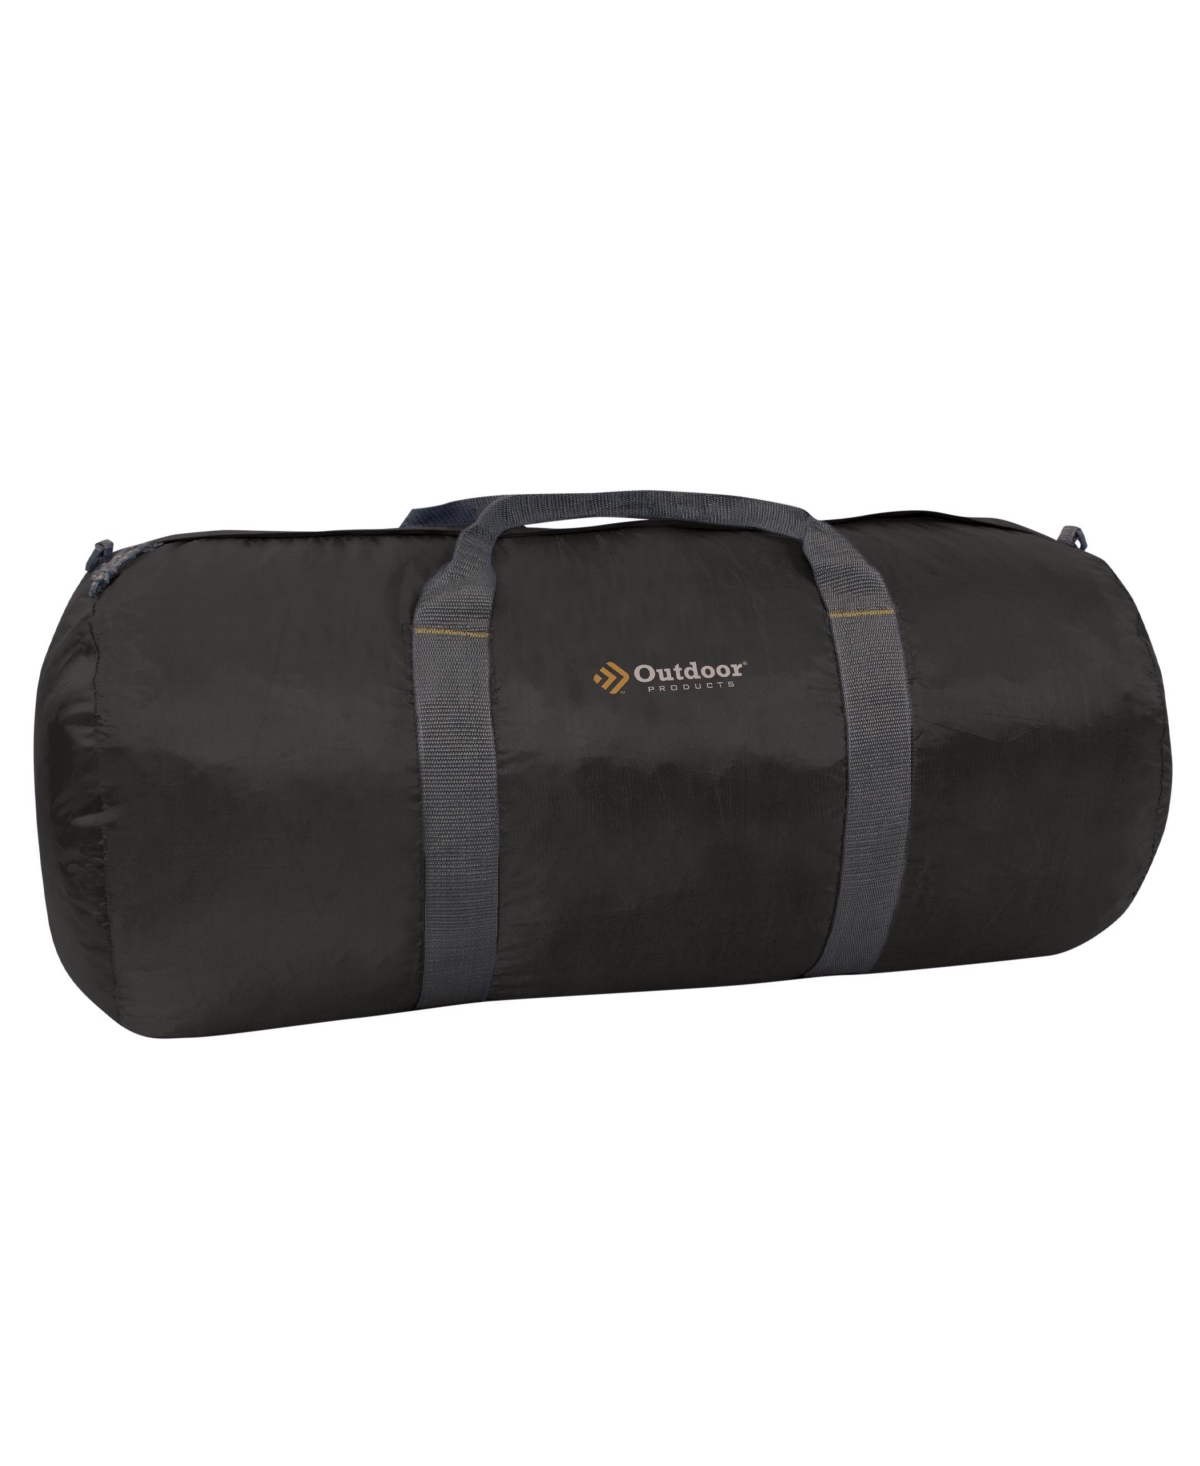 Outdoor Products Large Deluxe Duffel In Black